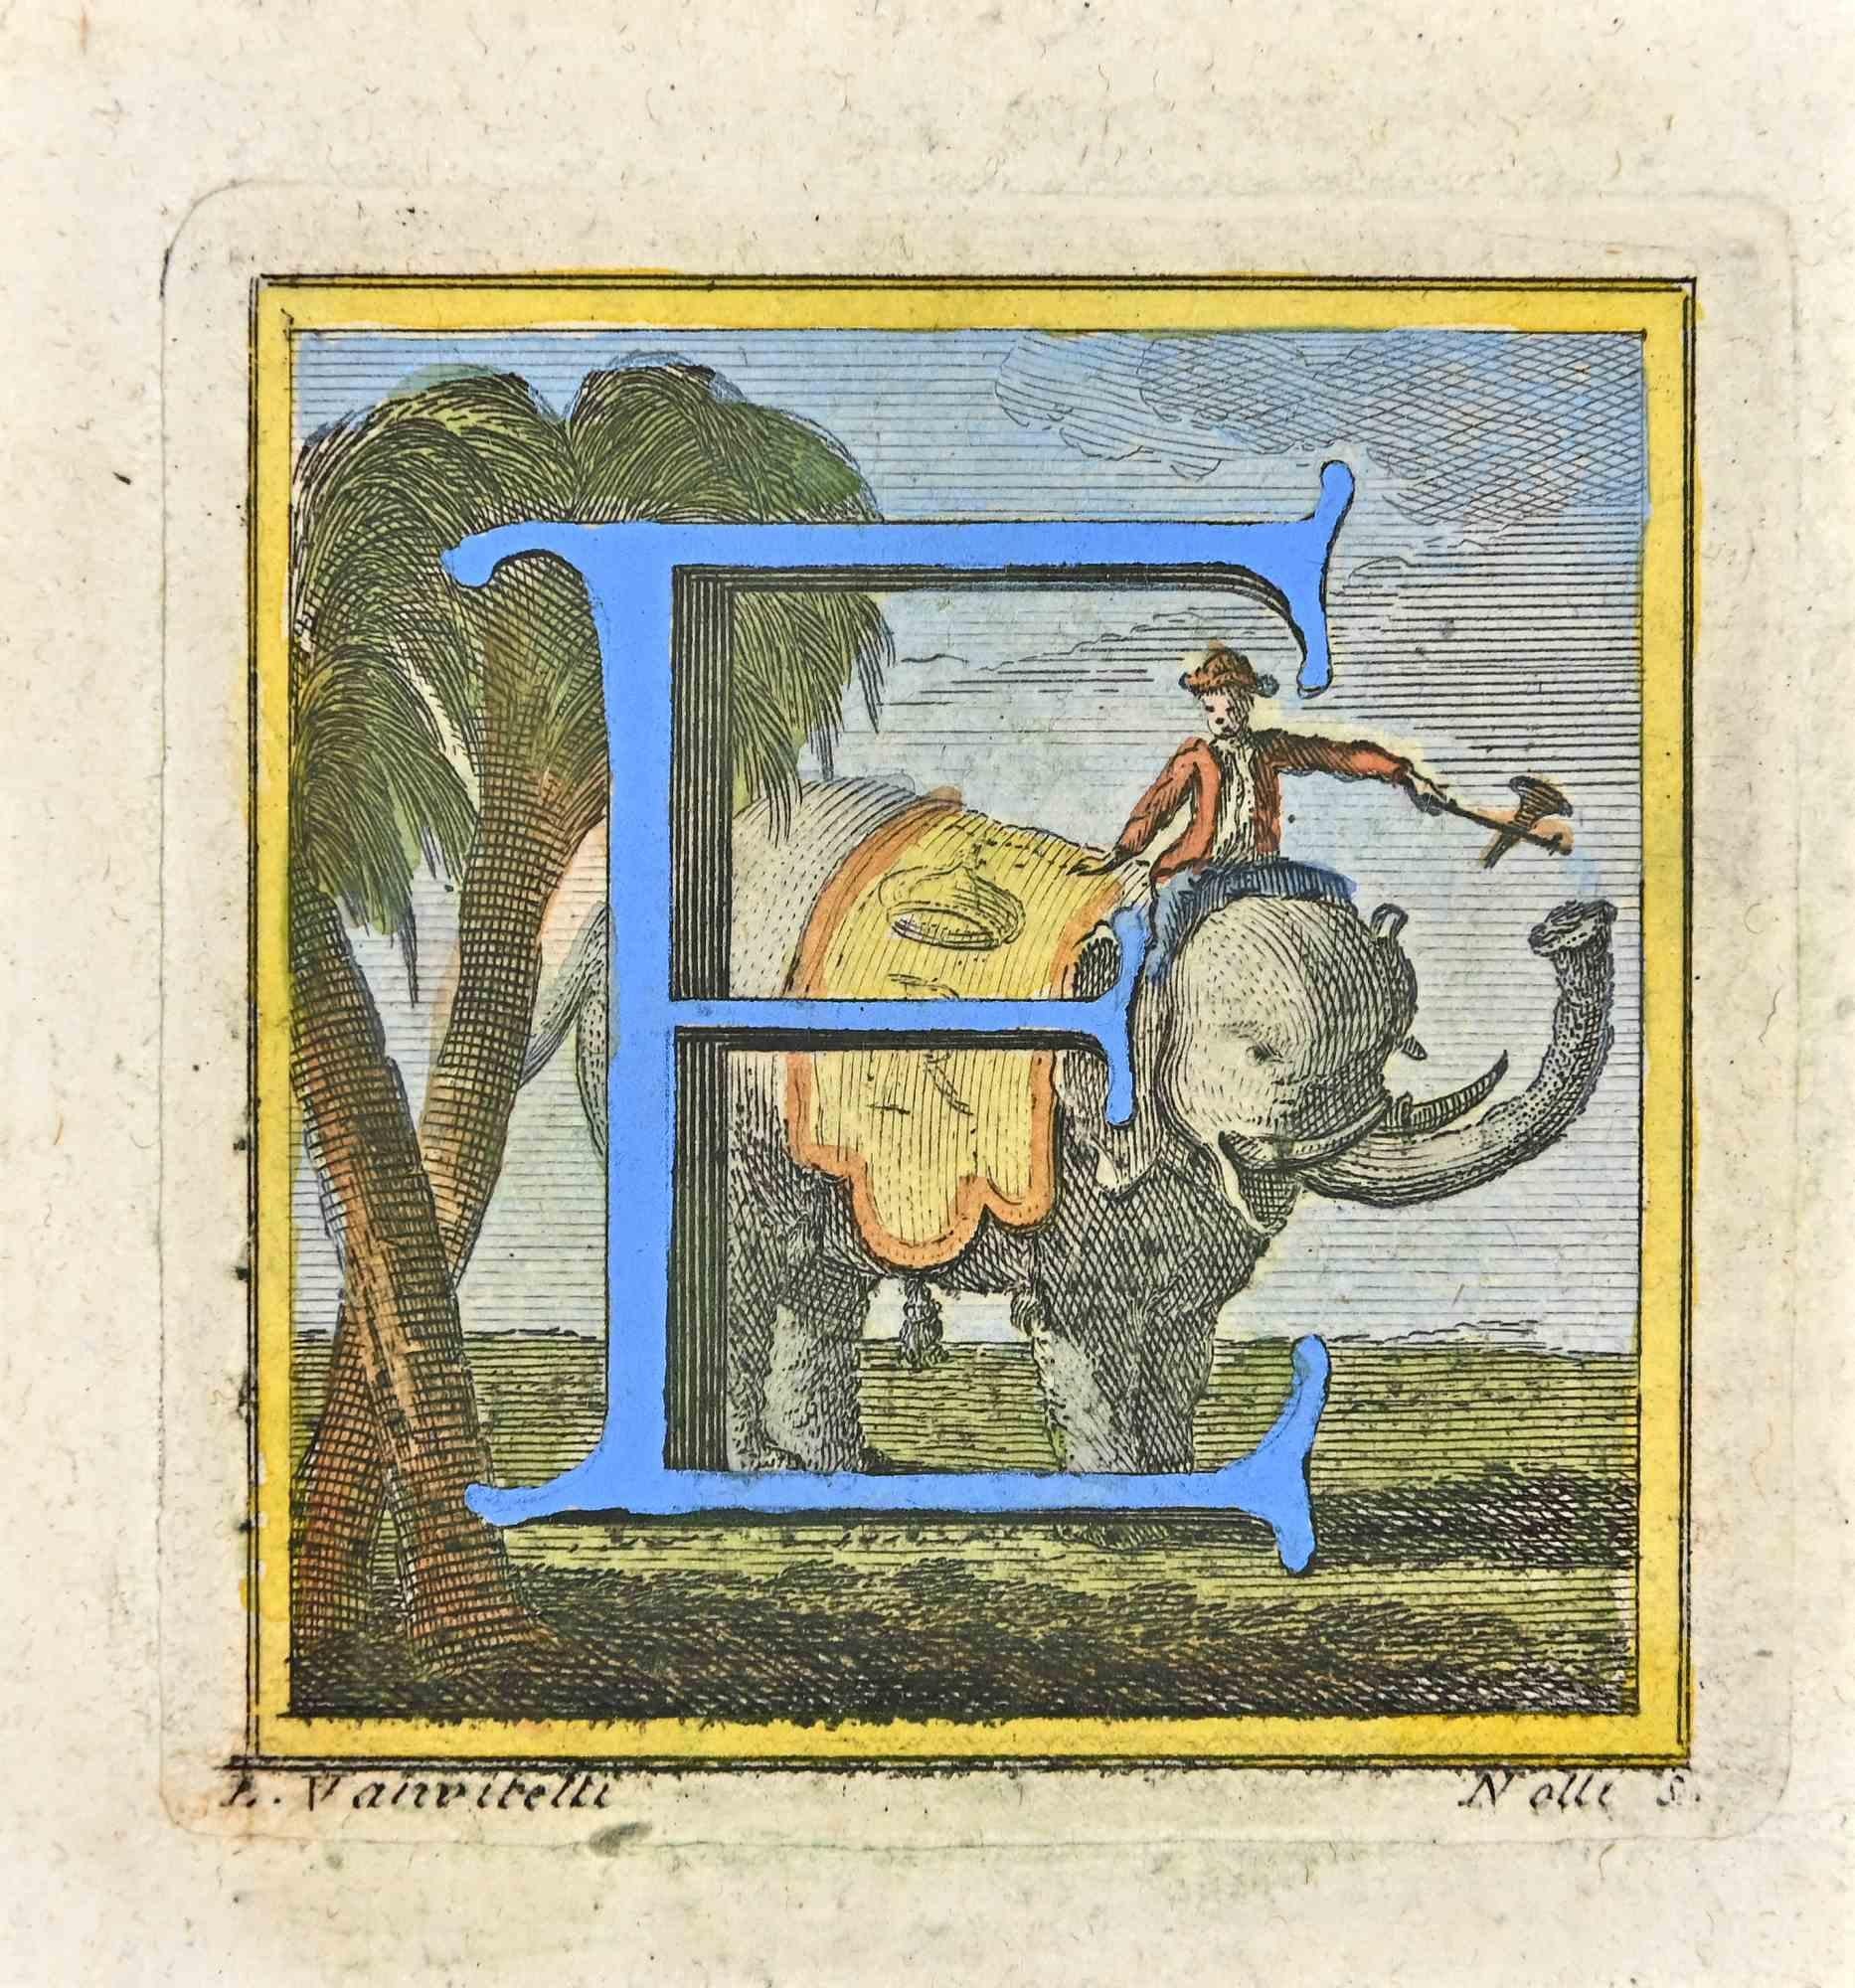 Letter of the Alphabet E  from the series "Antiquities of Herculaneum", is an etching on paper realized by Luigi Vanvitelli in the 18th century.

Signed on the plate.

Good conditions.

The etching belongs to the print suite “Antiquities of